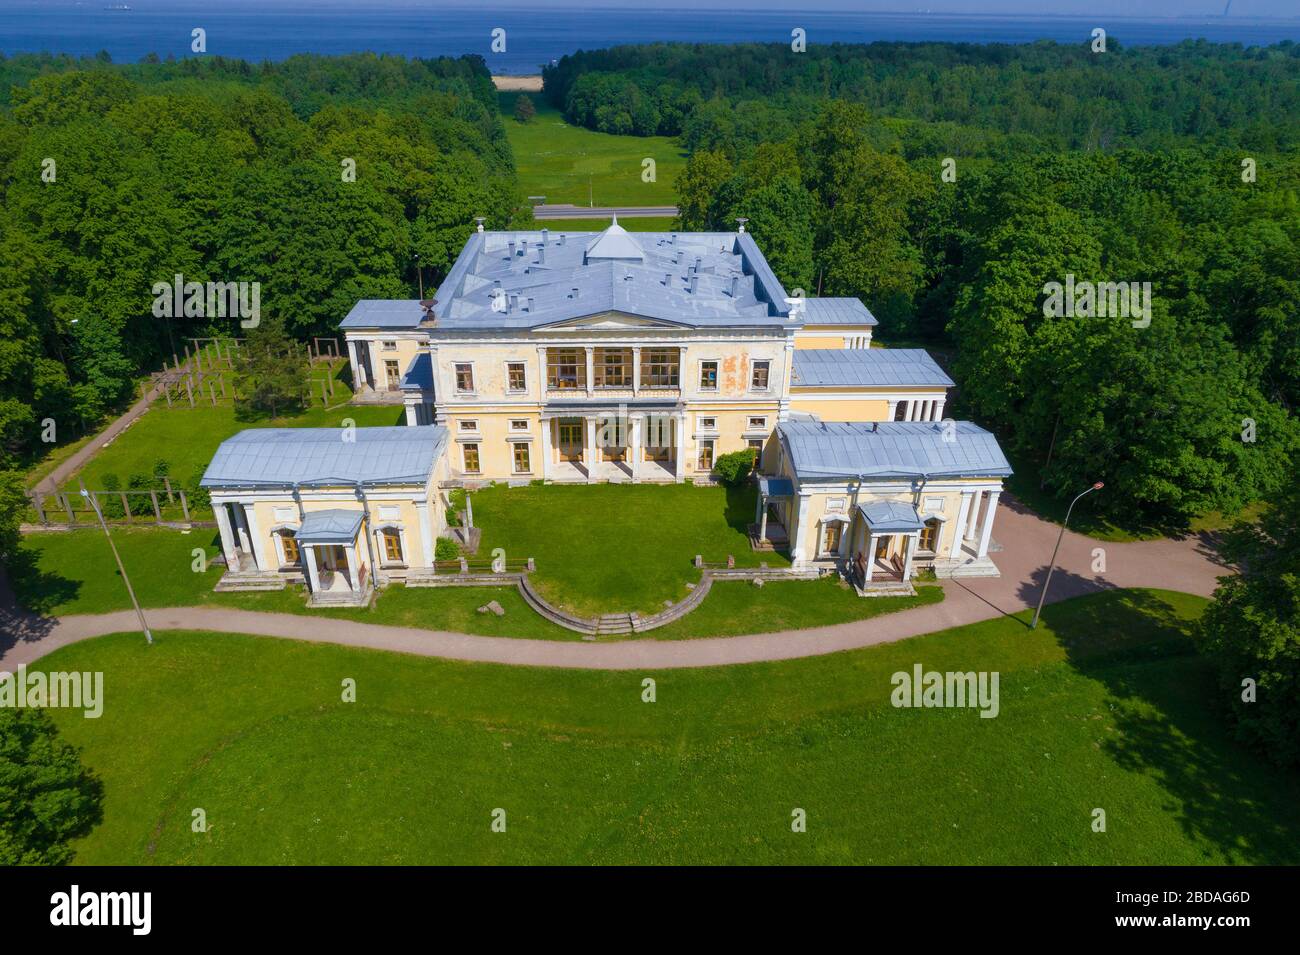 PETERHOF, RUSSIA - JUNE, 2019: Aerial view of the old palace of the Dukes of Leuchtenberg on a sunny June day. Manor 'Sergievka' in Old Peterhof Stock Photo